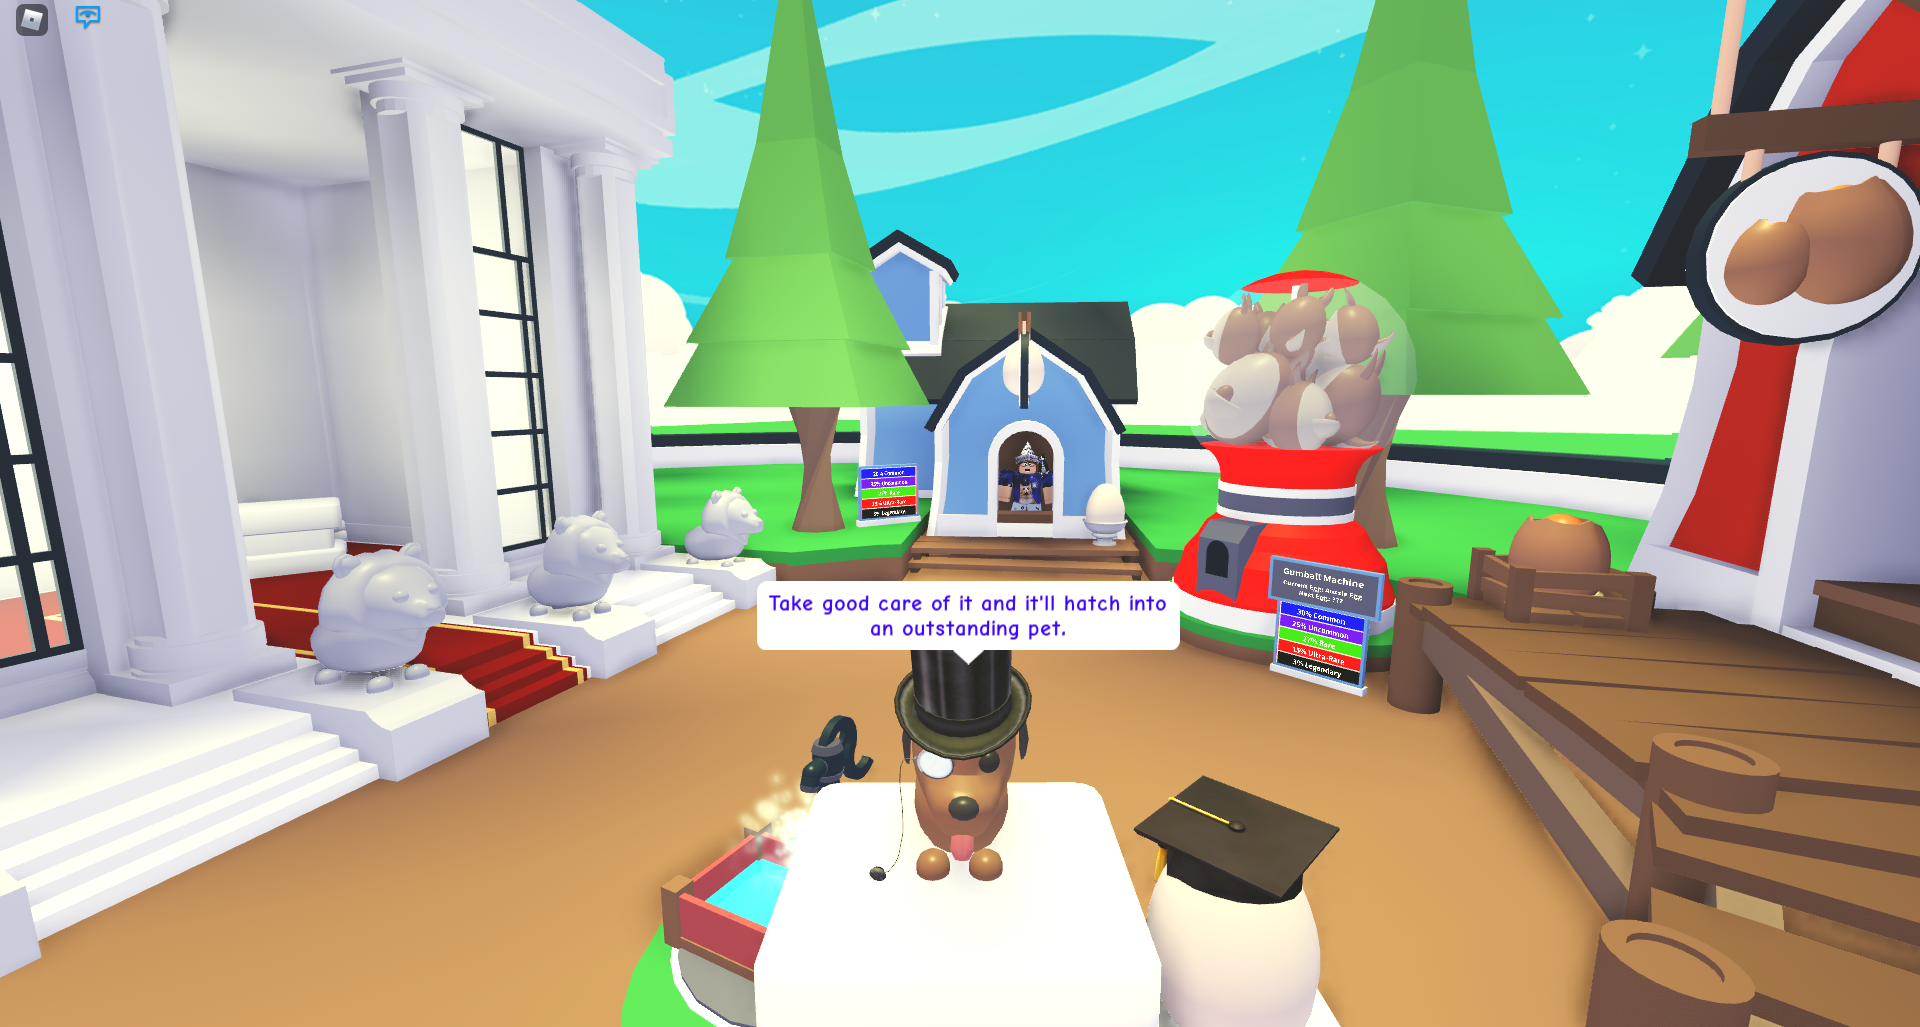 What Is Adopt Me One Of The Most Popular Games On Roblox - is adopt me the most popular game on roblox 2020